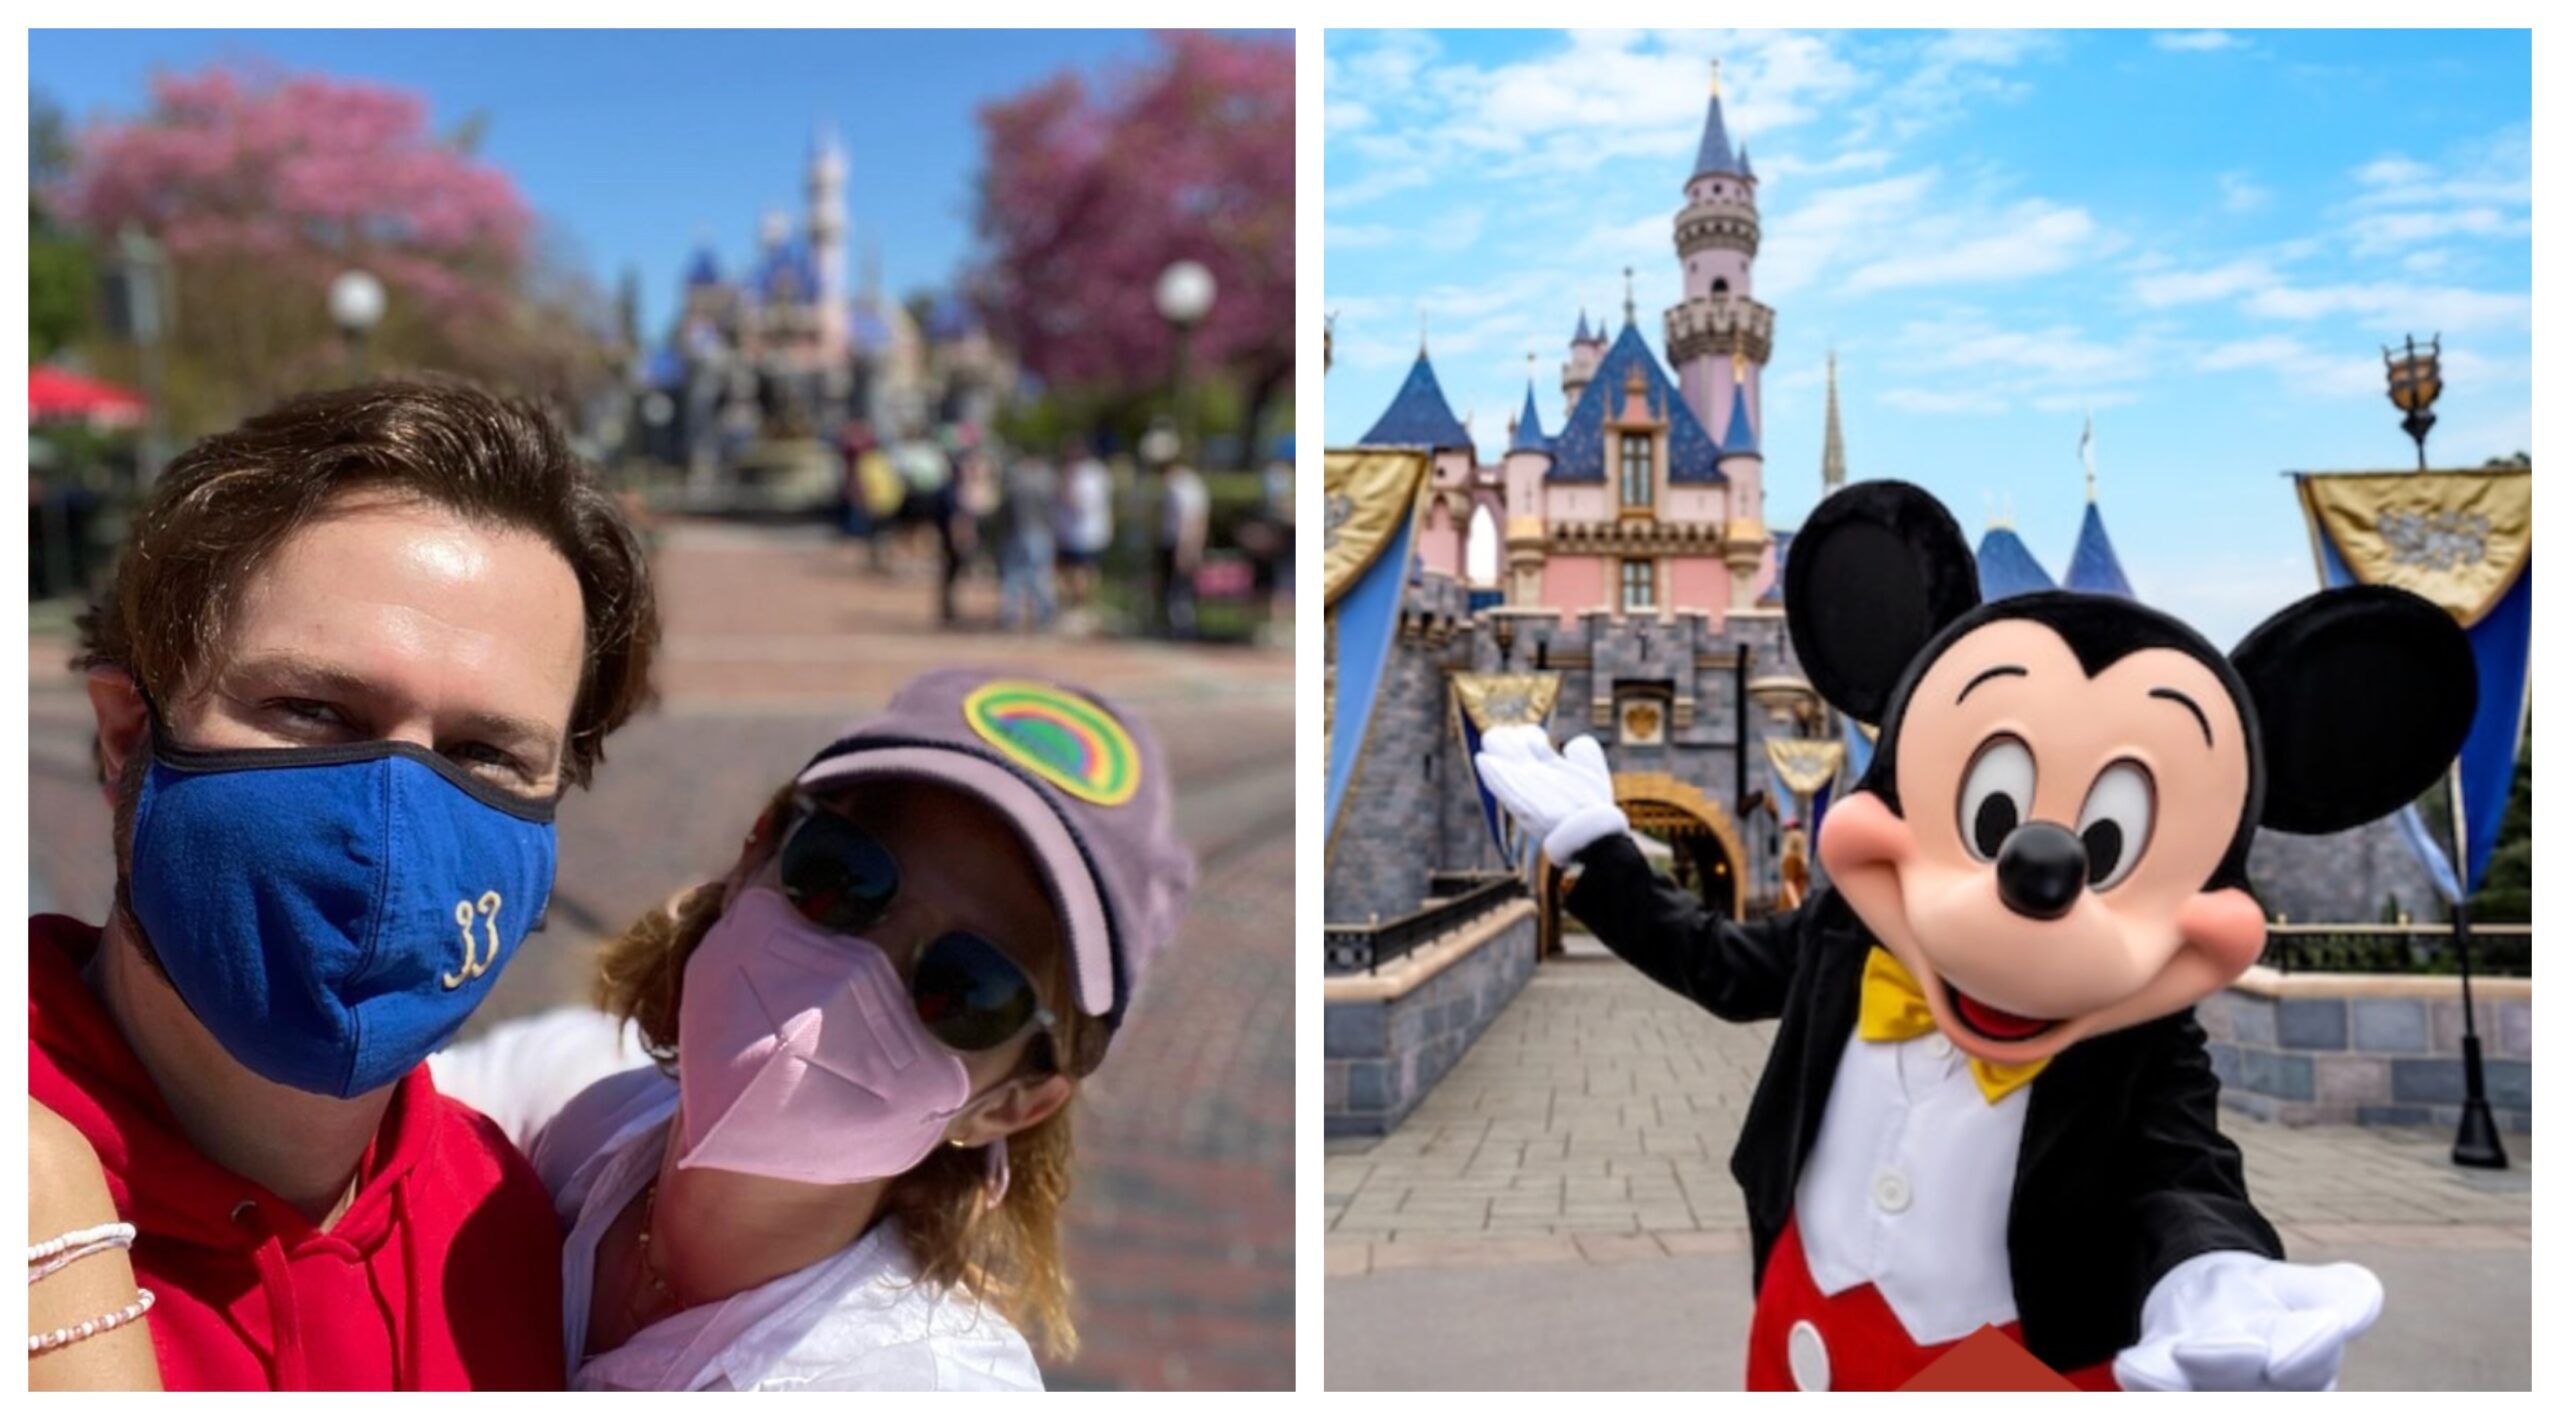 Taran Killam and Cobie Smulders (left) and Mickey Mouse in front of Sleeping Beauty Castle (right)